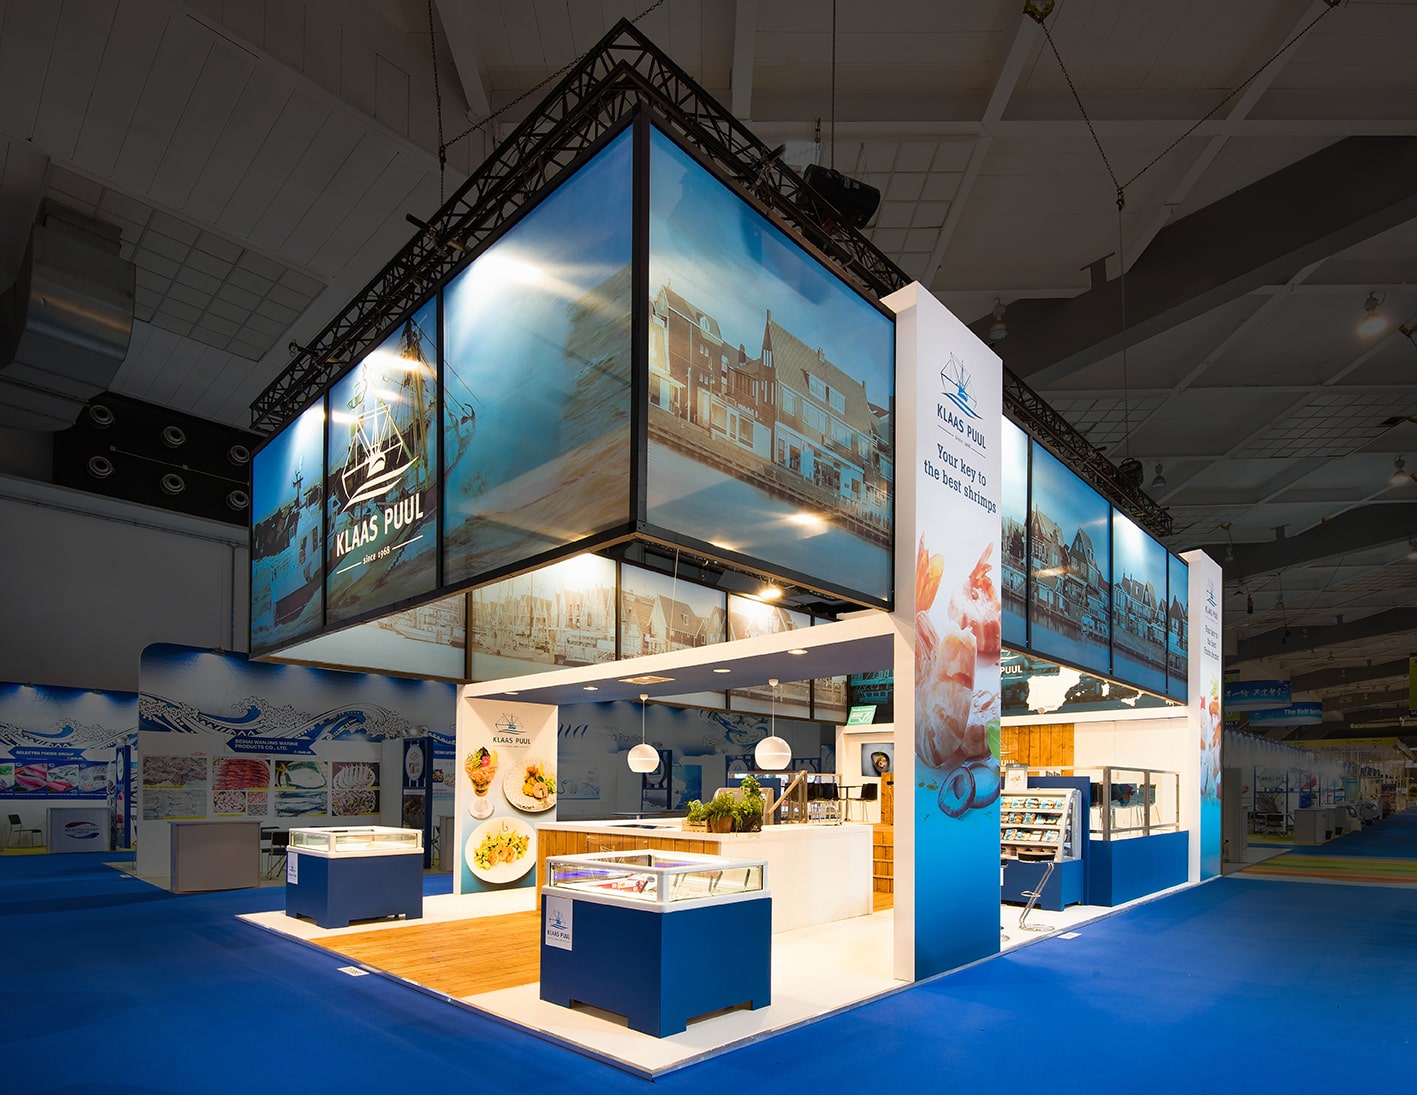 Exhibition stand Klaas Puul Seafood Expo